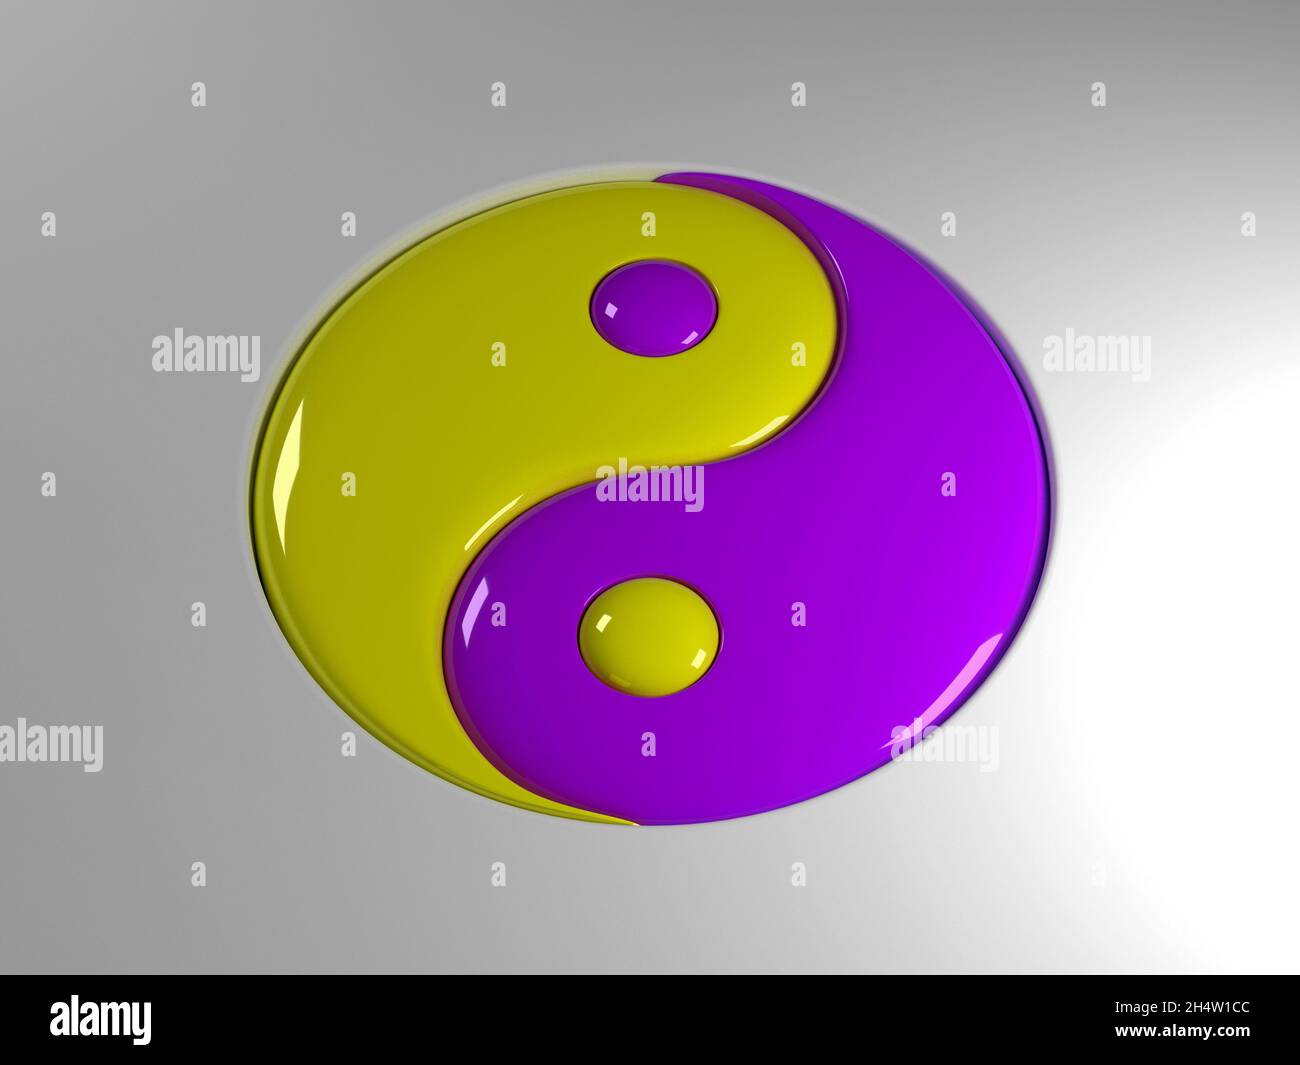 3d rendering of the ancient symbol of Tao (yin and yang) with a liquid glossy look in complementary colors Stock Photo